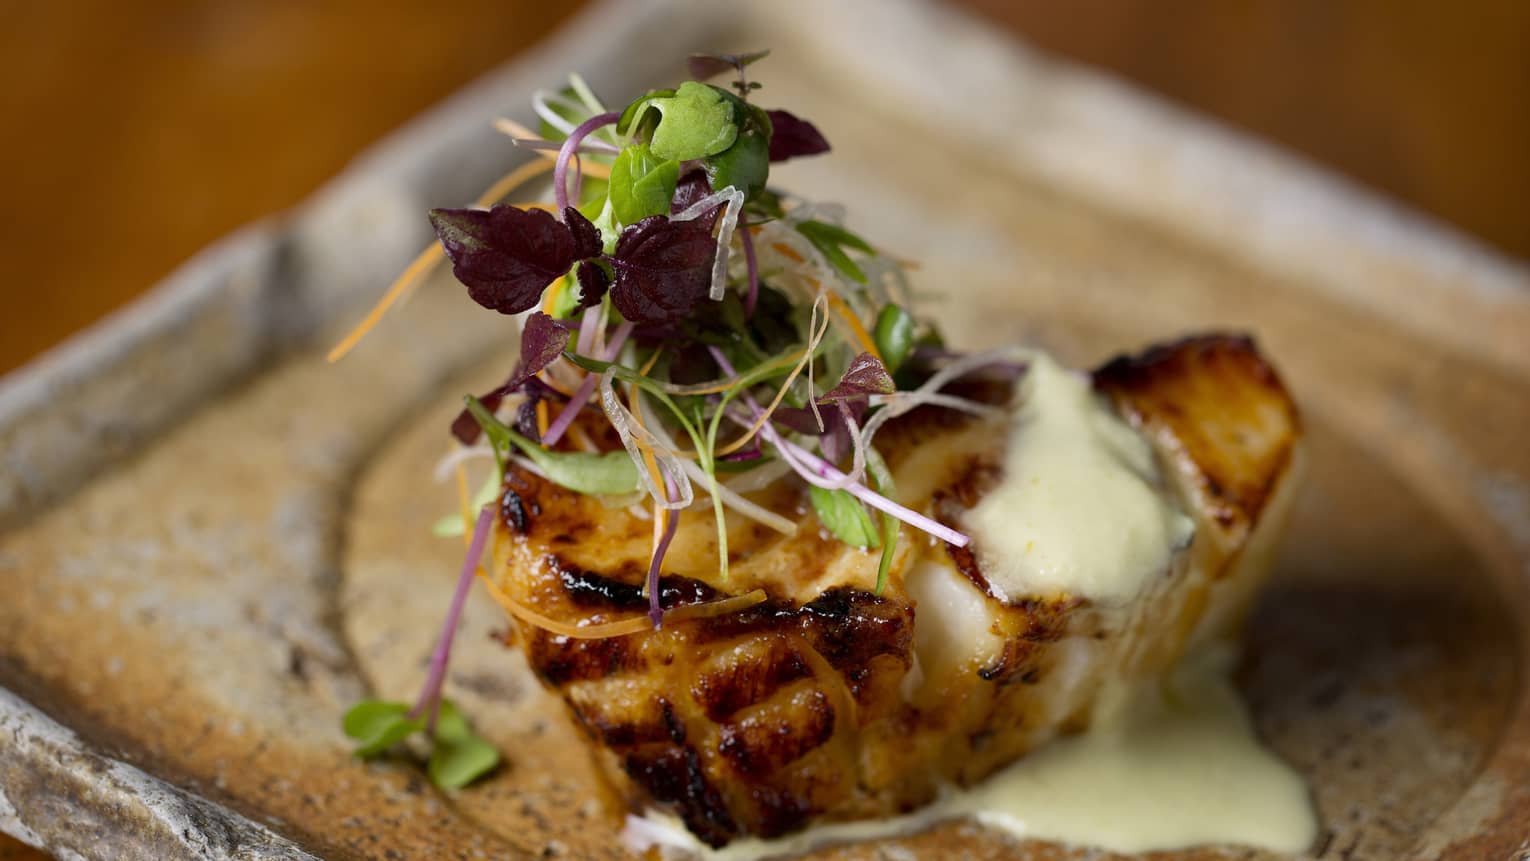 Grilled Chilean seabass with green chilli, ginger dressing at Zuma restaurant